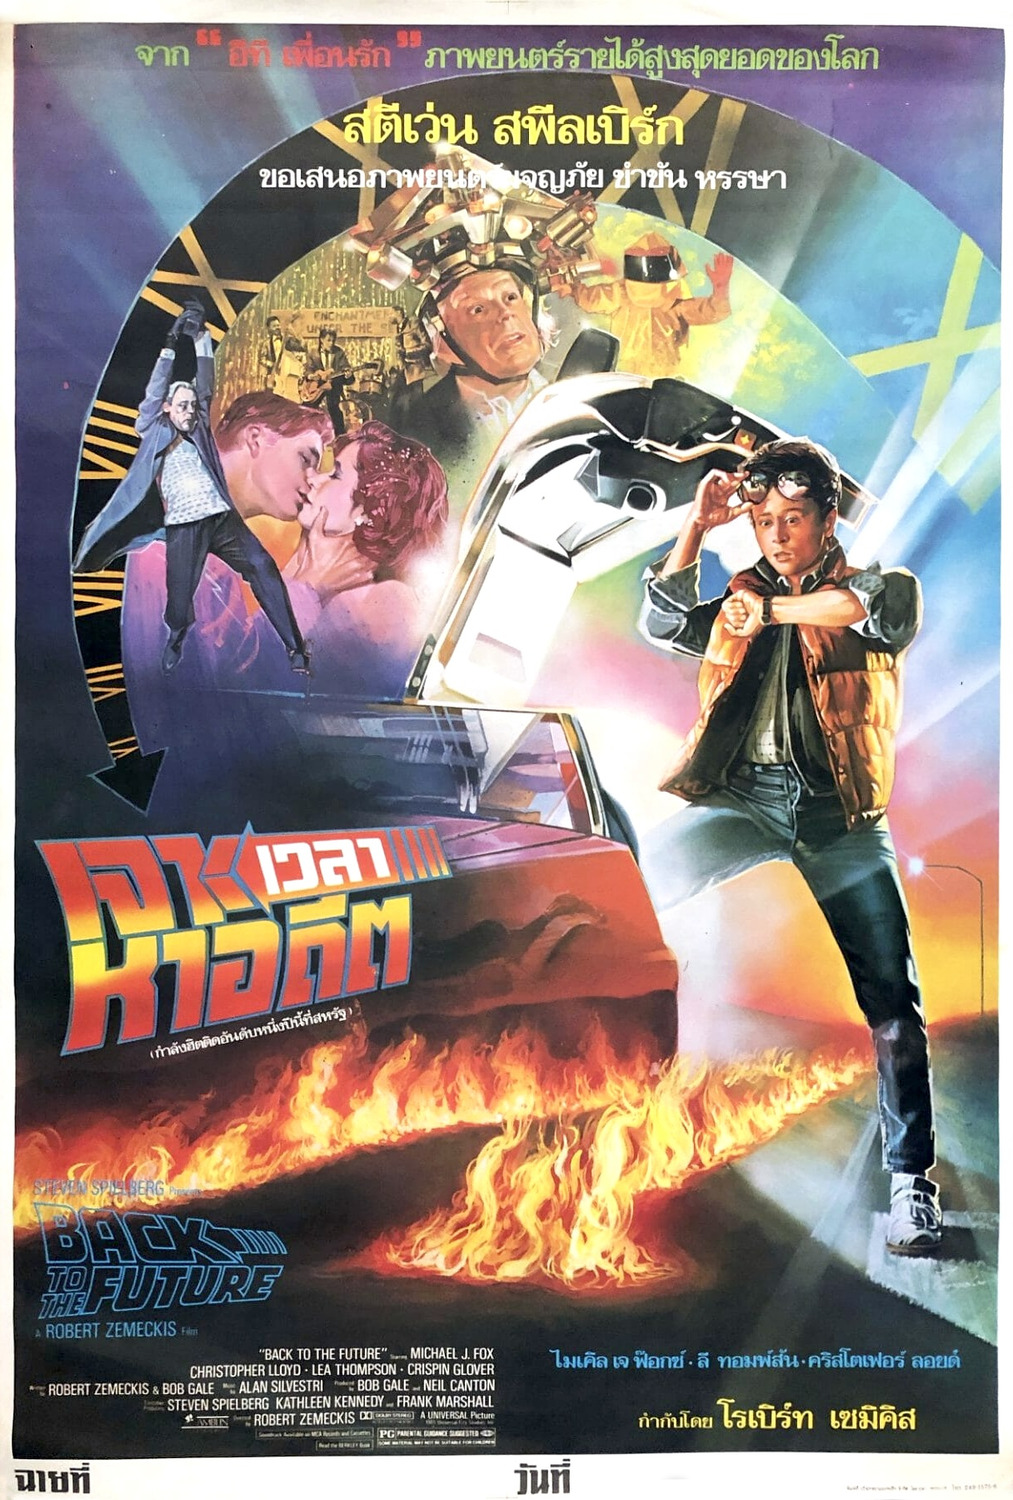 Extra Large Movie Poster Image for Back to the Future (#4 of 5)